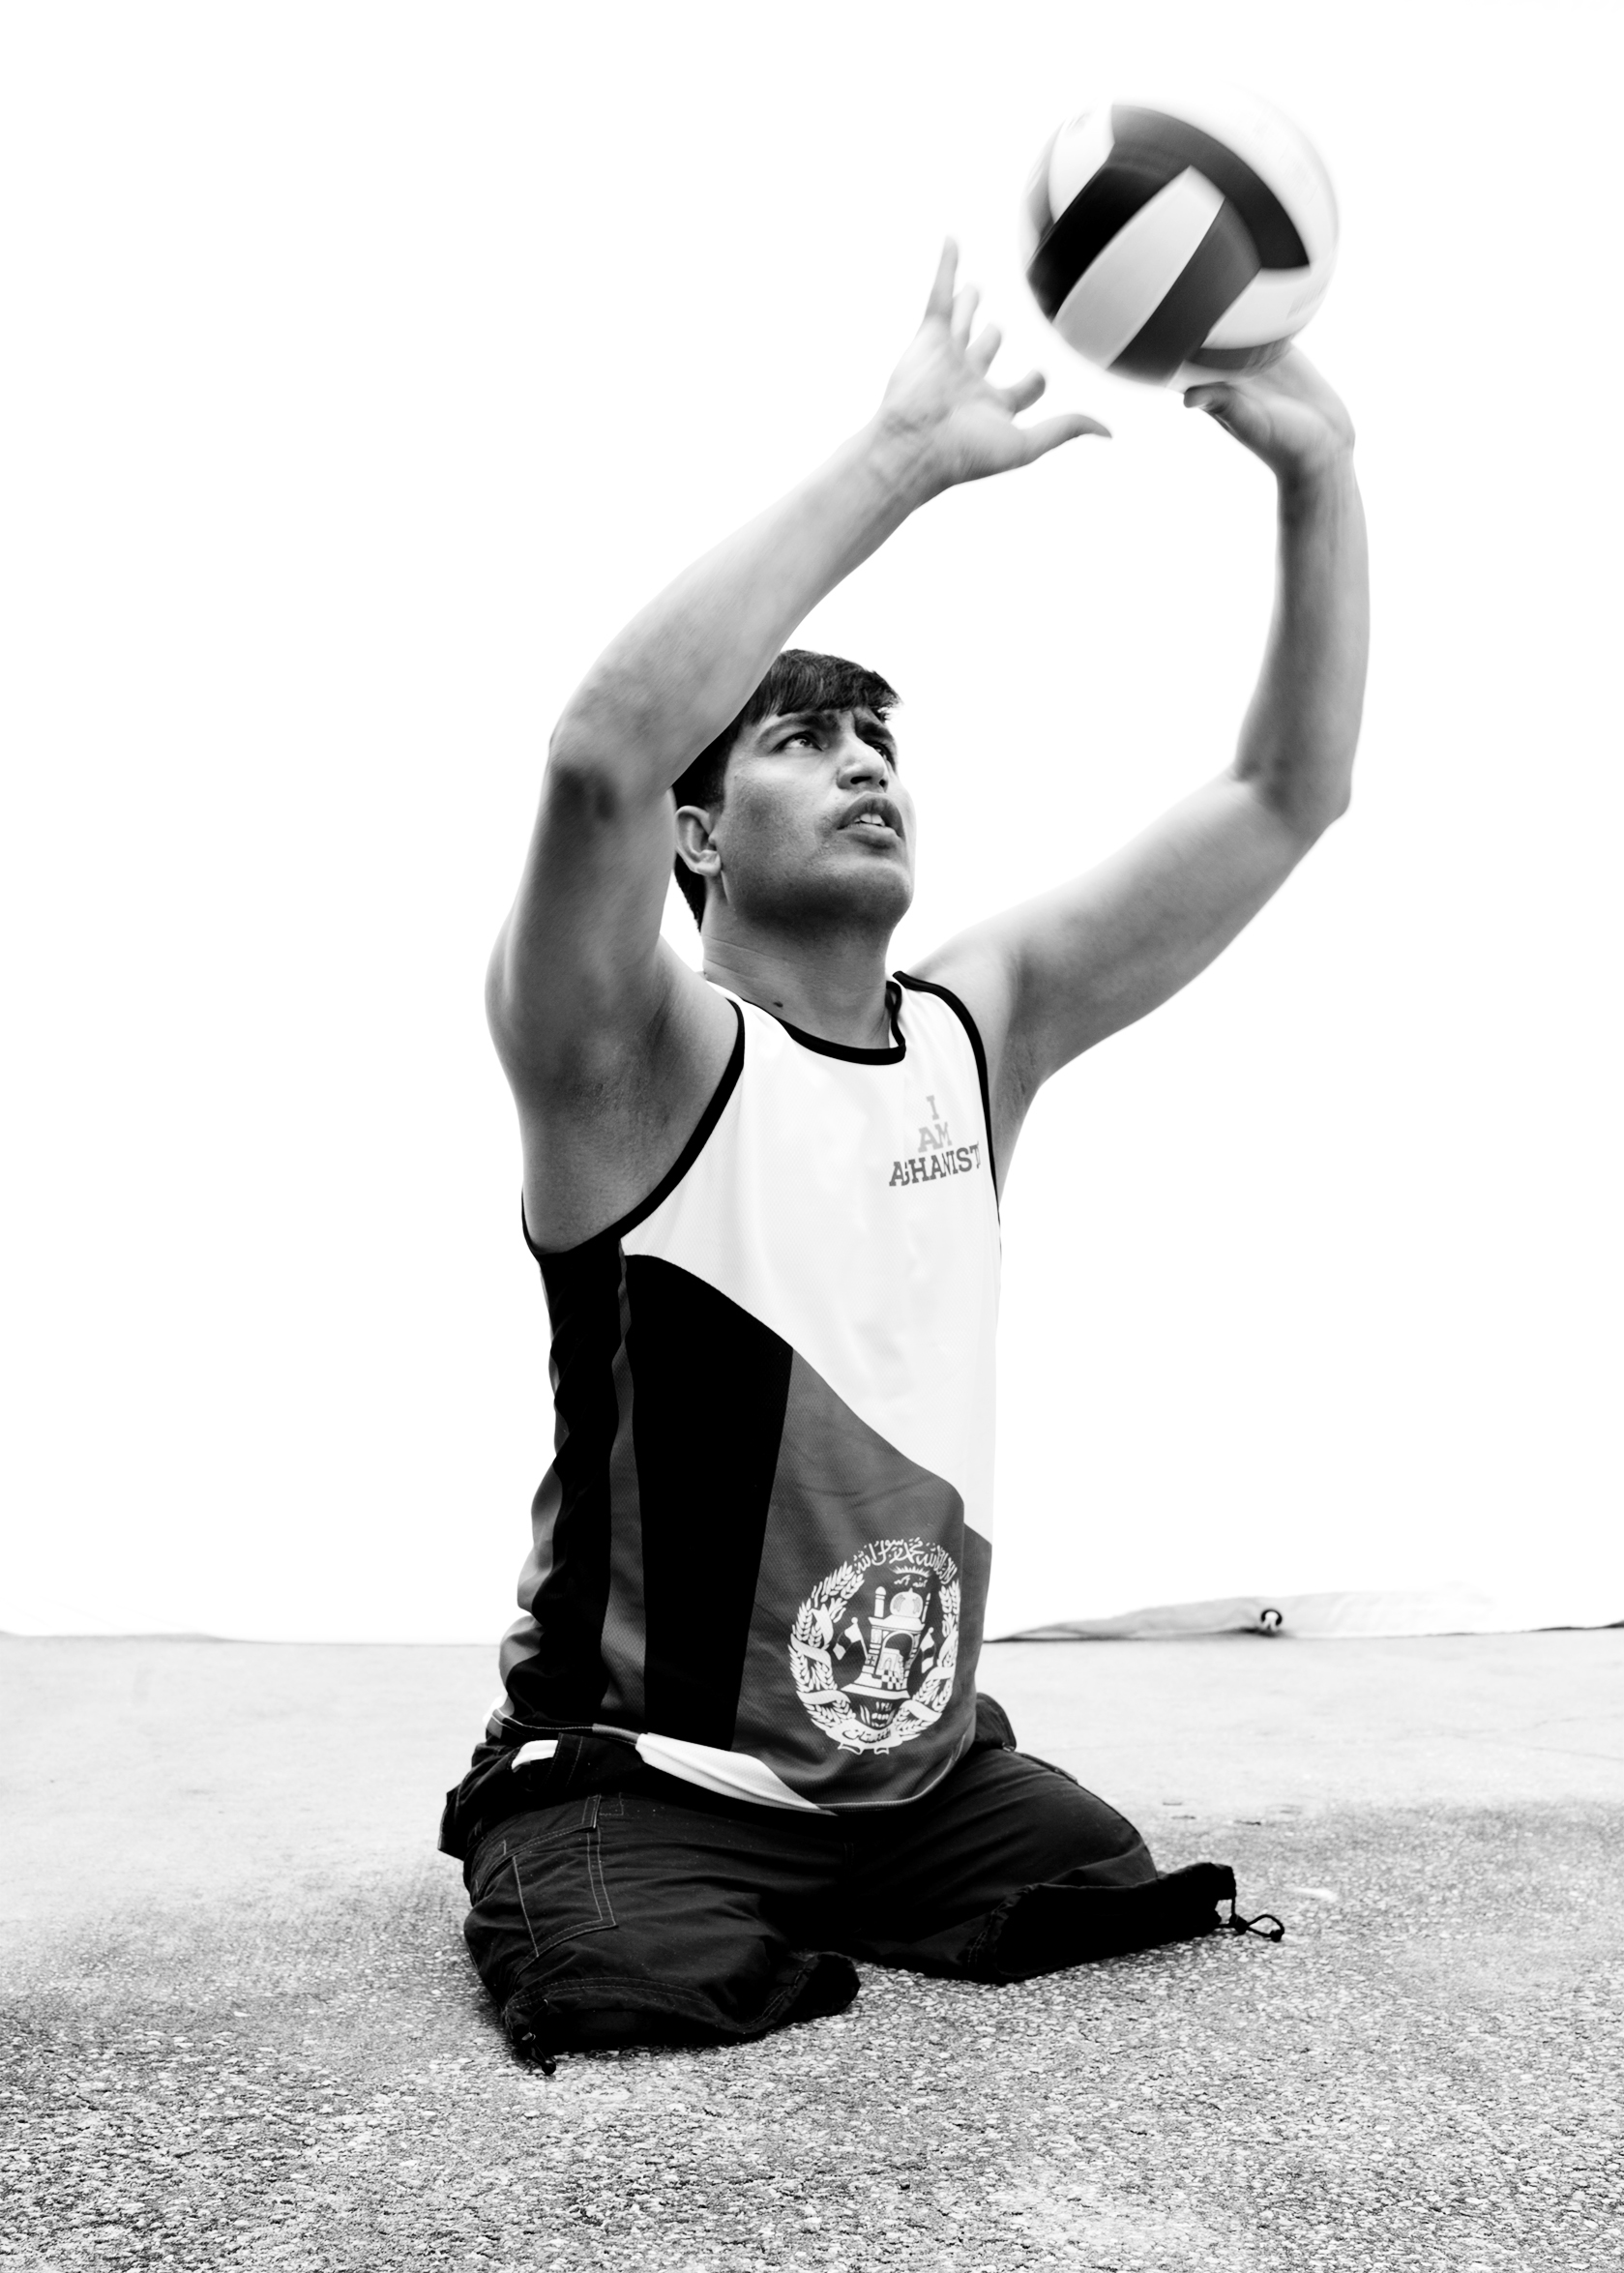 Nader Halimi, Afghanistan, competed in volleyball and rowing